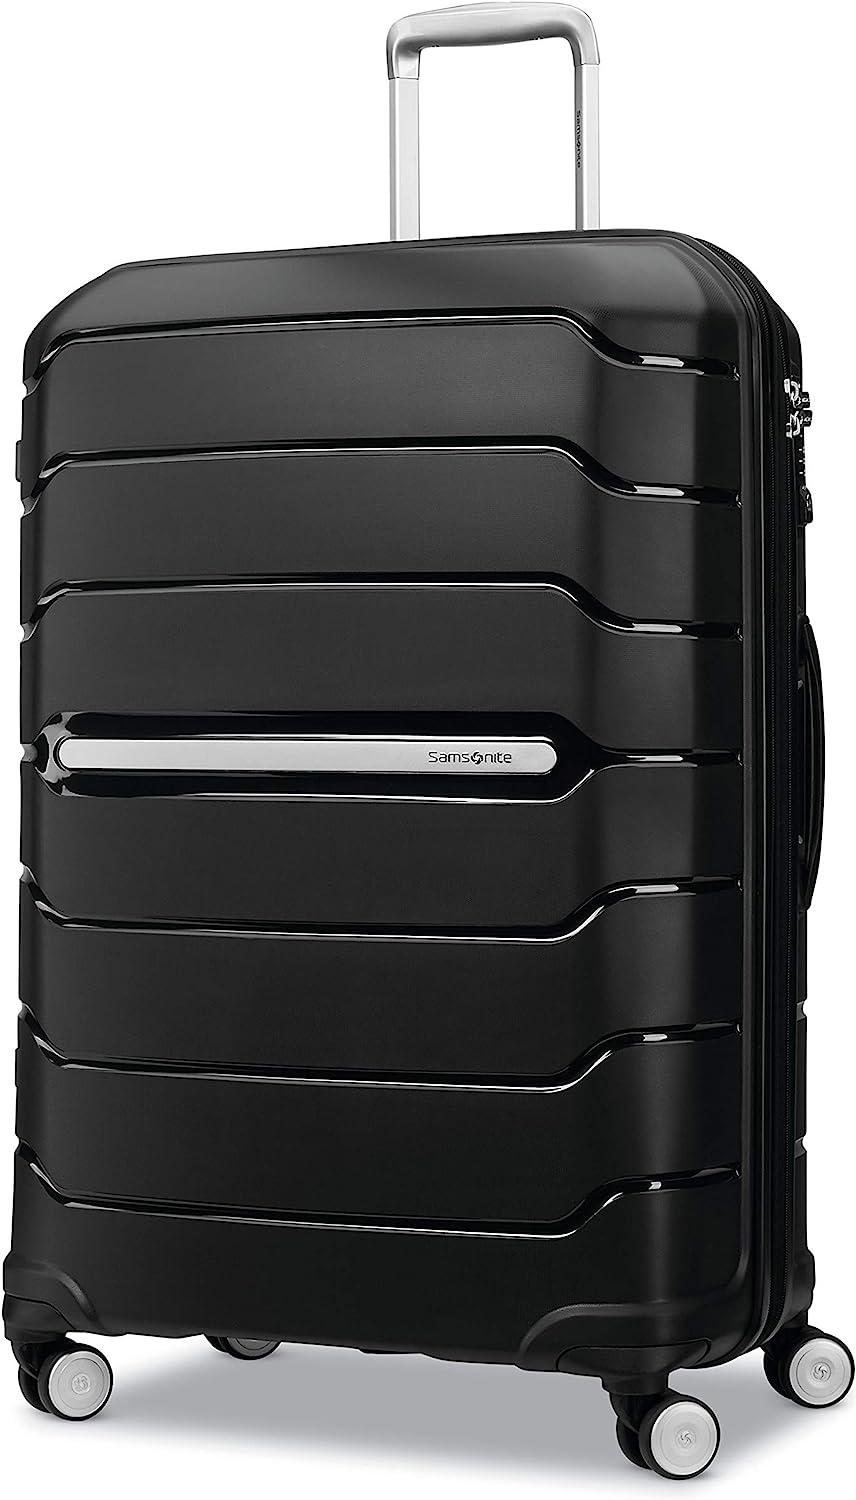 Samsonite Freeform Hardside Expandable with Double Spinner Wheels Review